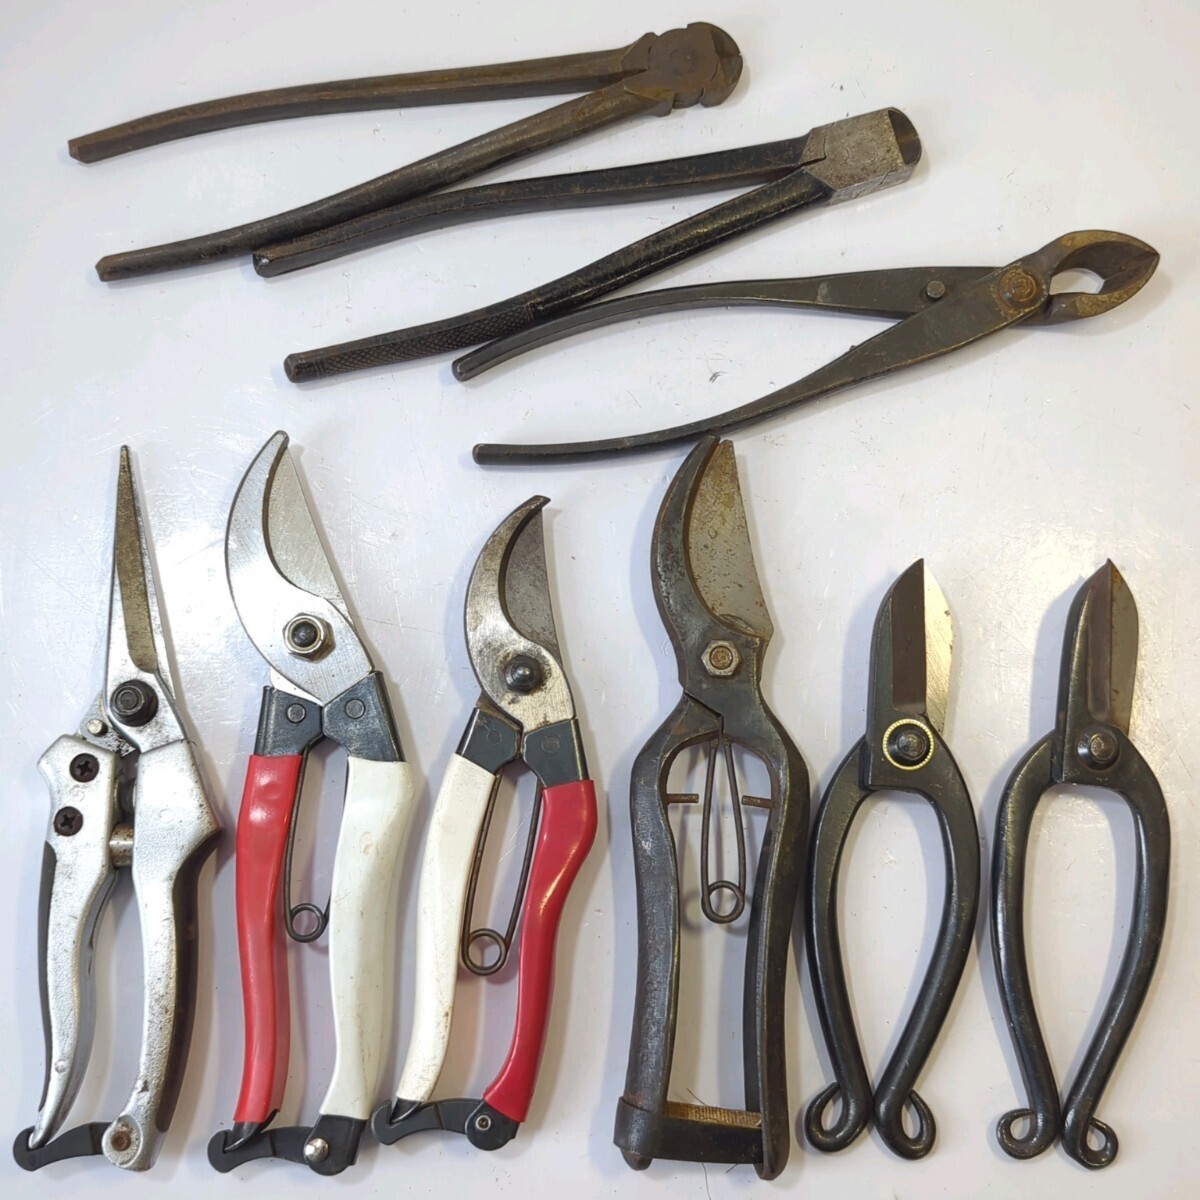  south ./ three tree chapter /.. one sword / hill ./ other pruning . moreover, branch cut . flower . wire cutter . gardening . together 9 pcs set pruning scissors flower cut .. bonsai . tool gardening 